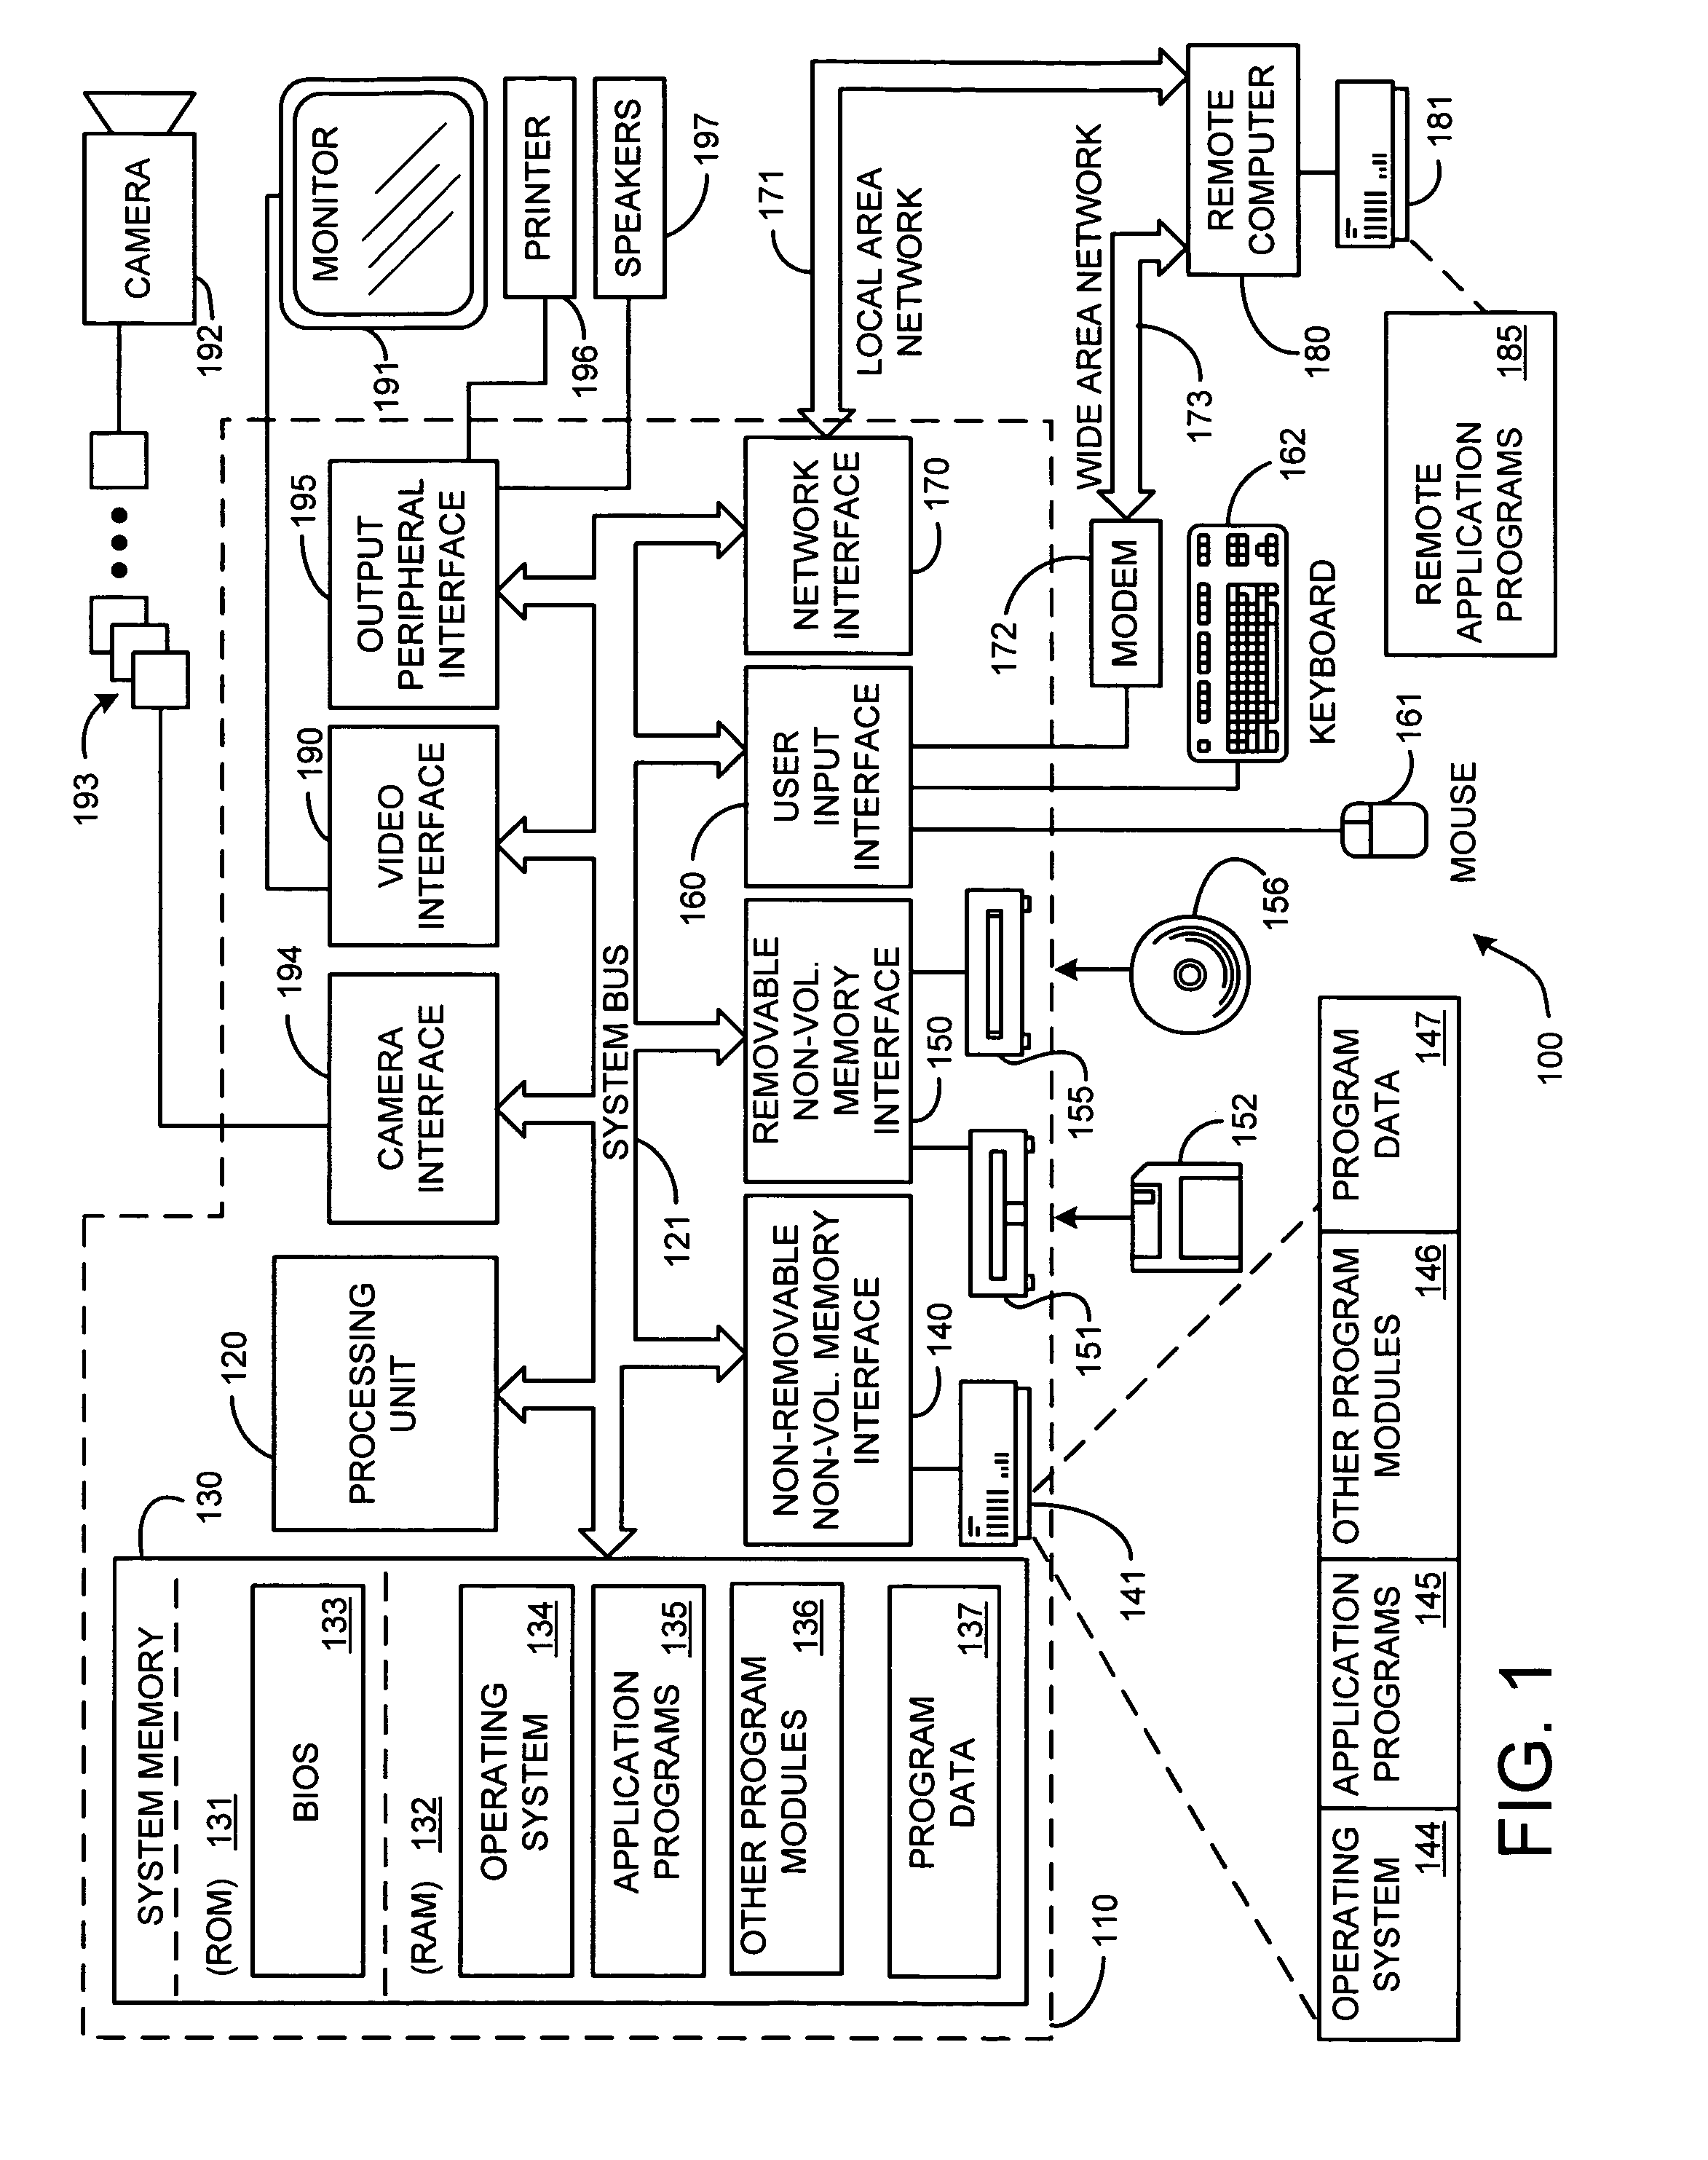 System and process for generating a two-layer, 3D representation of a scene